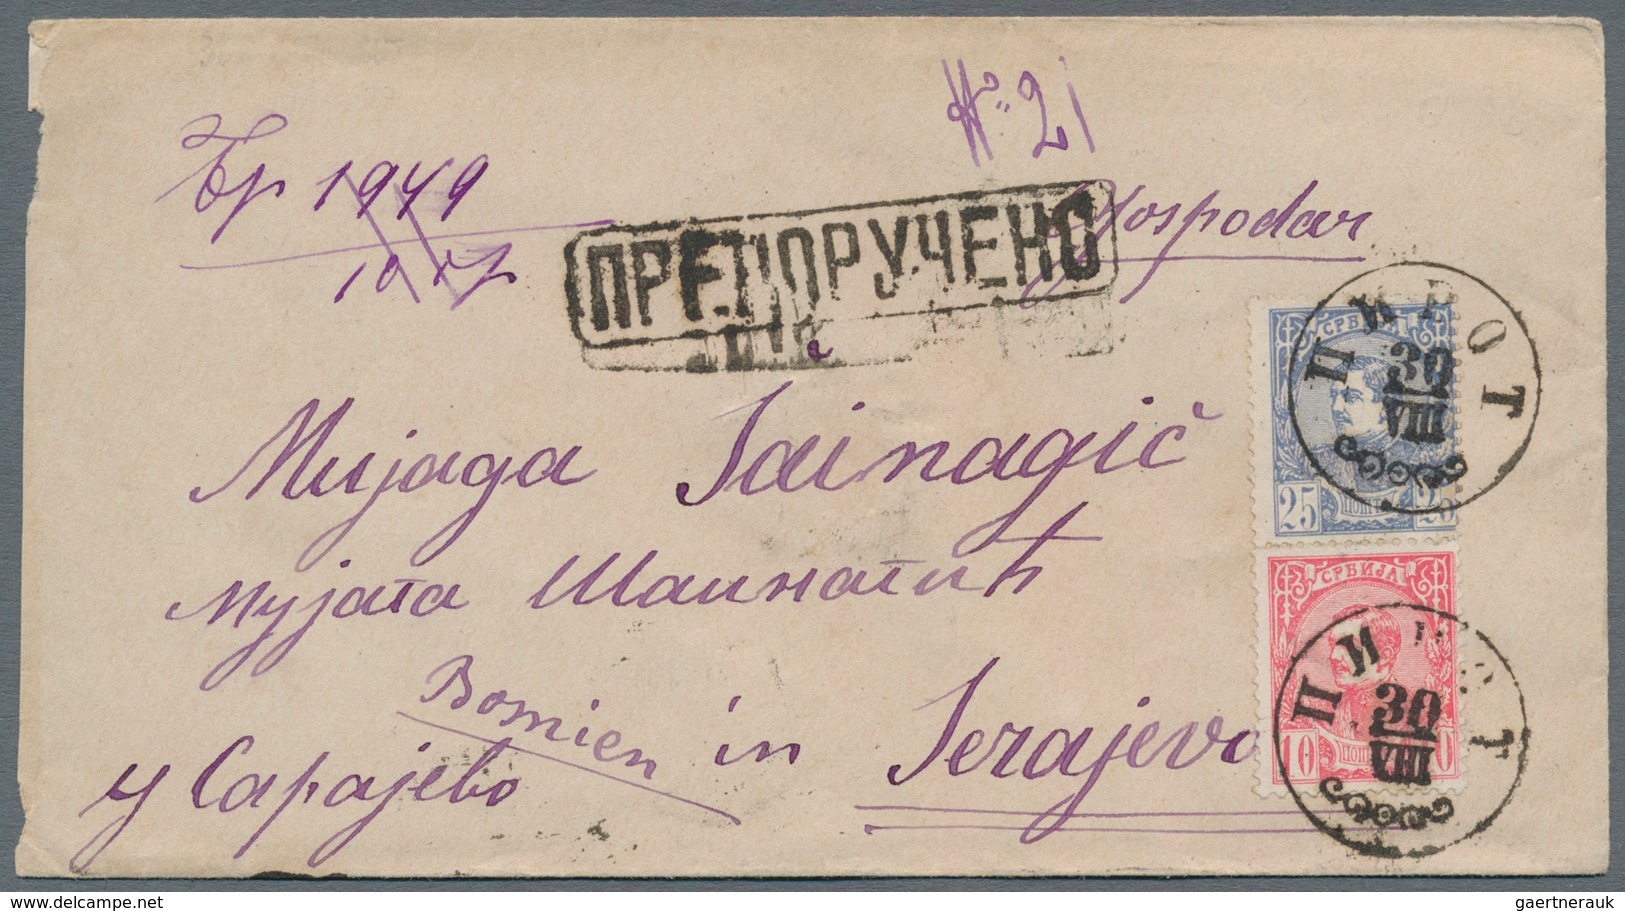 Serbien: 1883, 10pa. Rose And 25pa. Ultramarine, Correct 35pa. Rate On Cover From "PIROT 30/VIII" To - Serbie